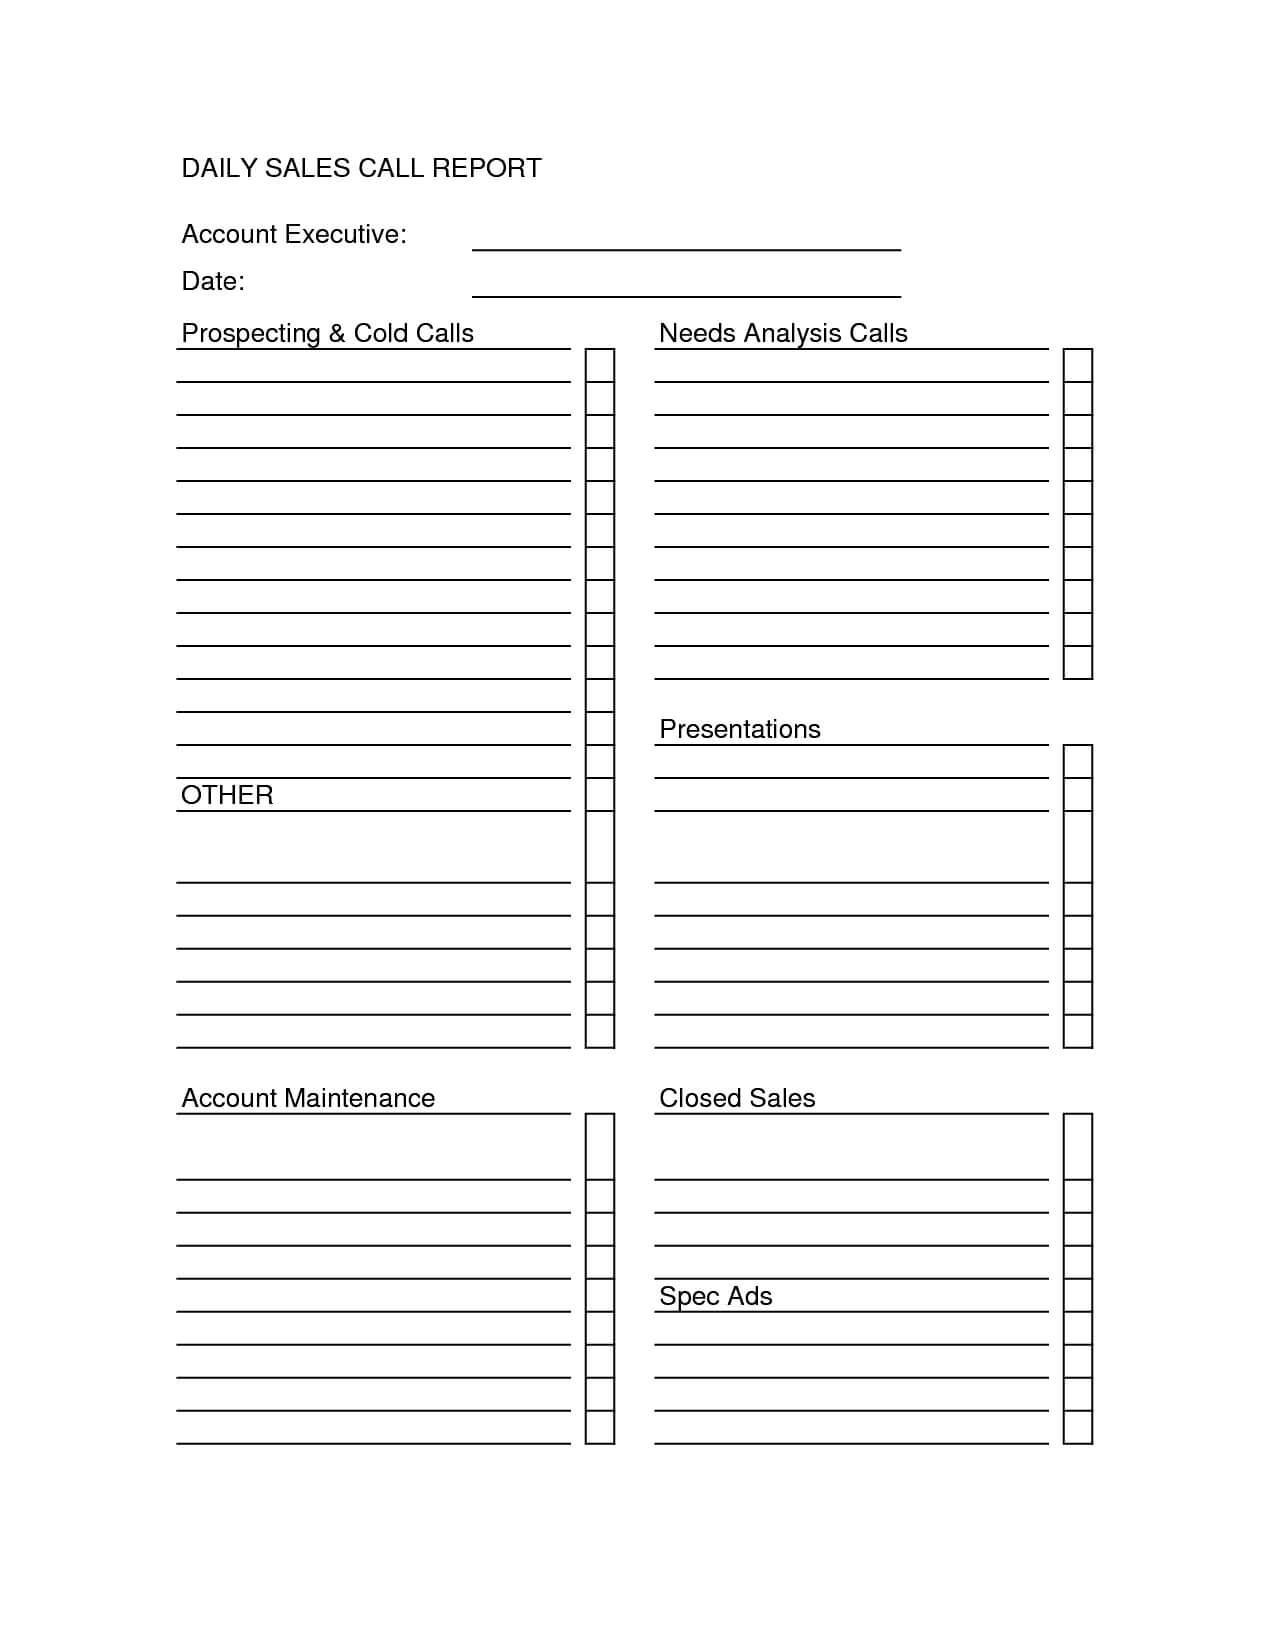 Sales Call Report Templates - Word Excel Fomats Inside Sales Call Reports Templates Free